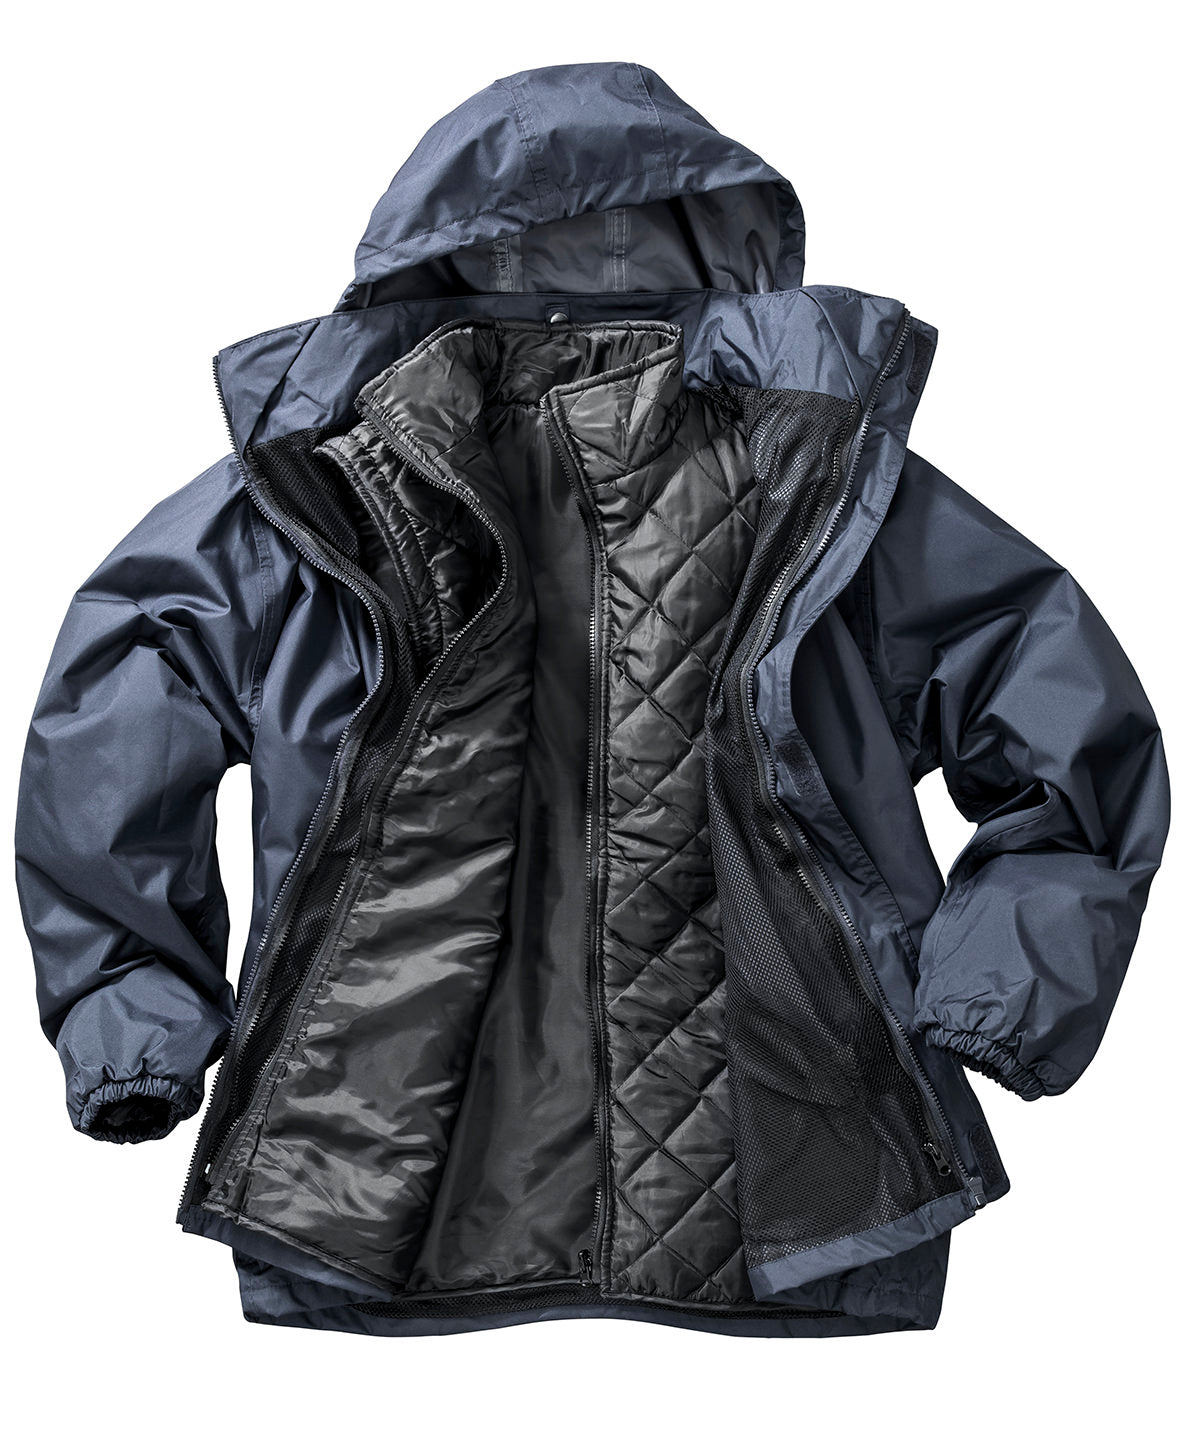 Core 3-in-1 jacket with quilted bodywarmer